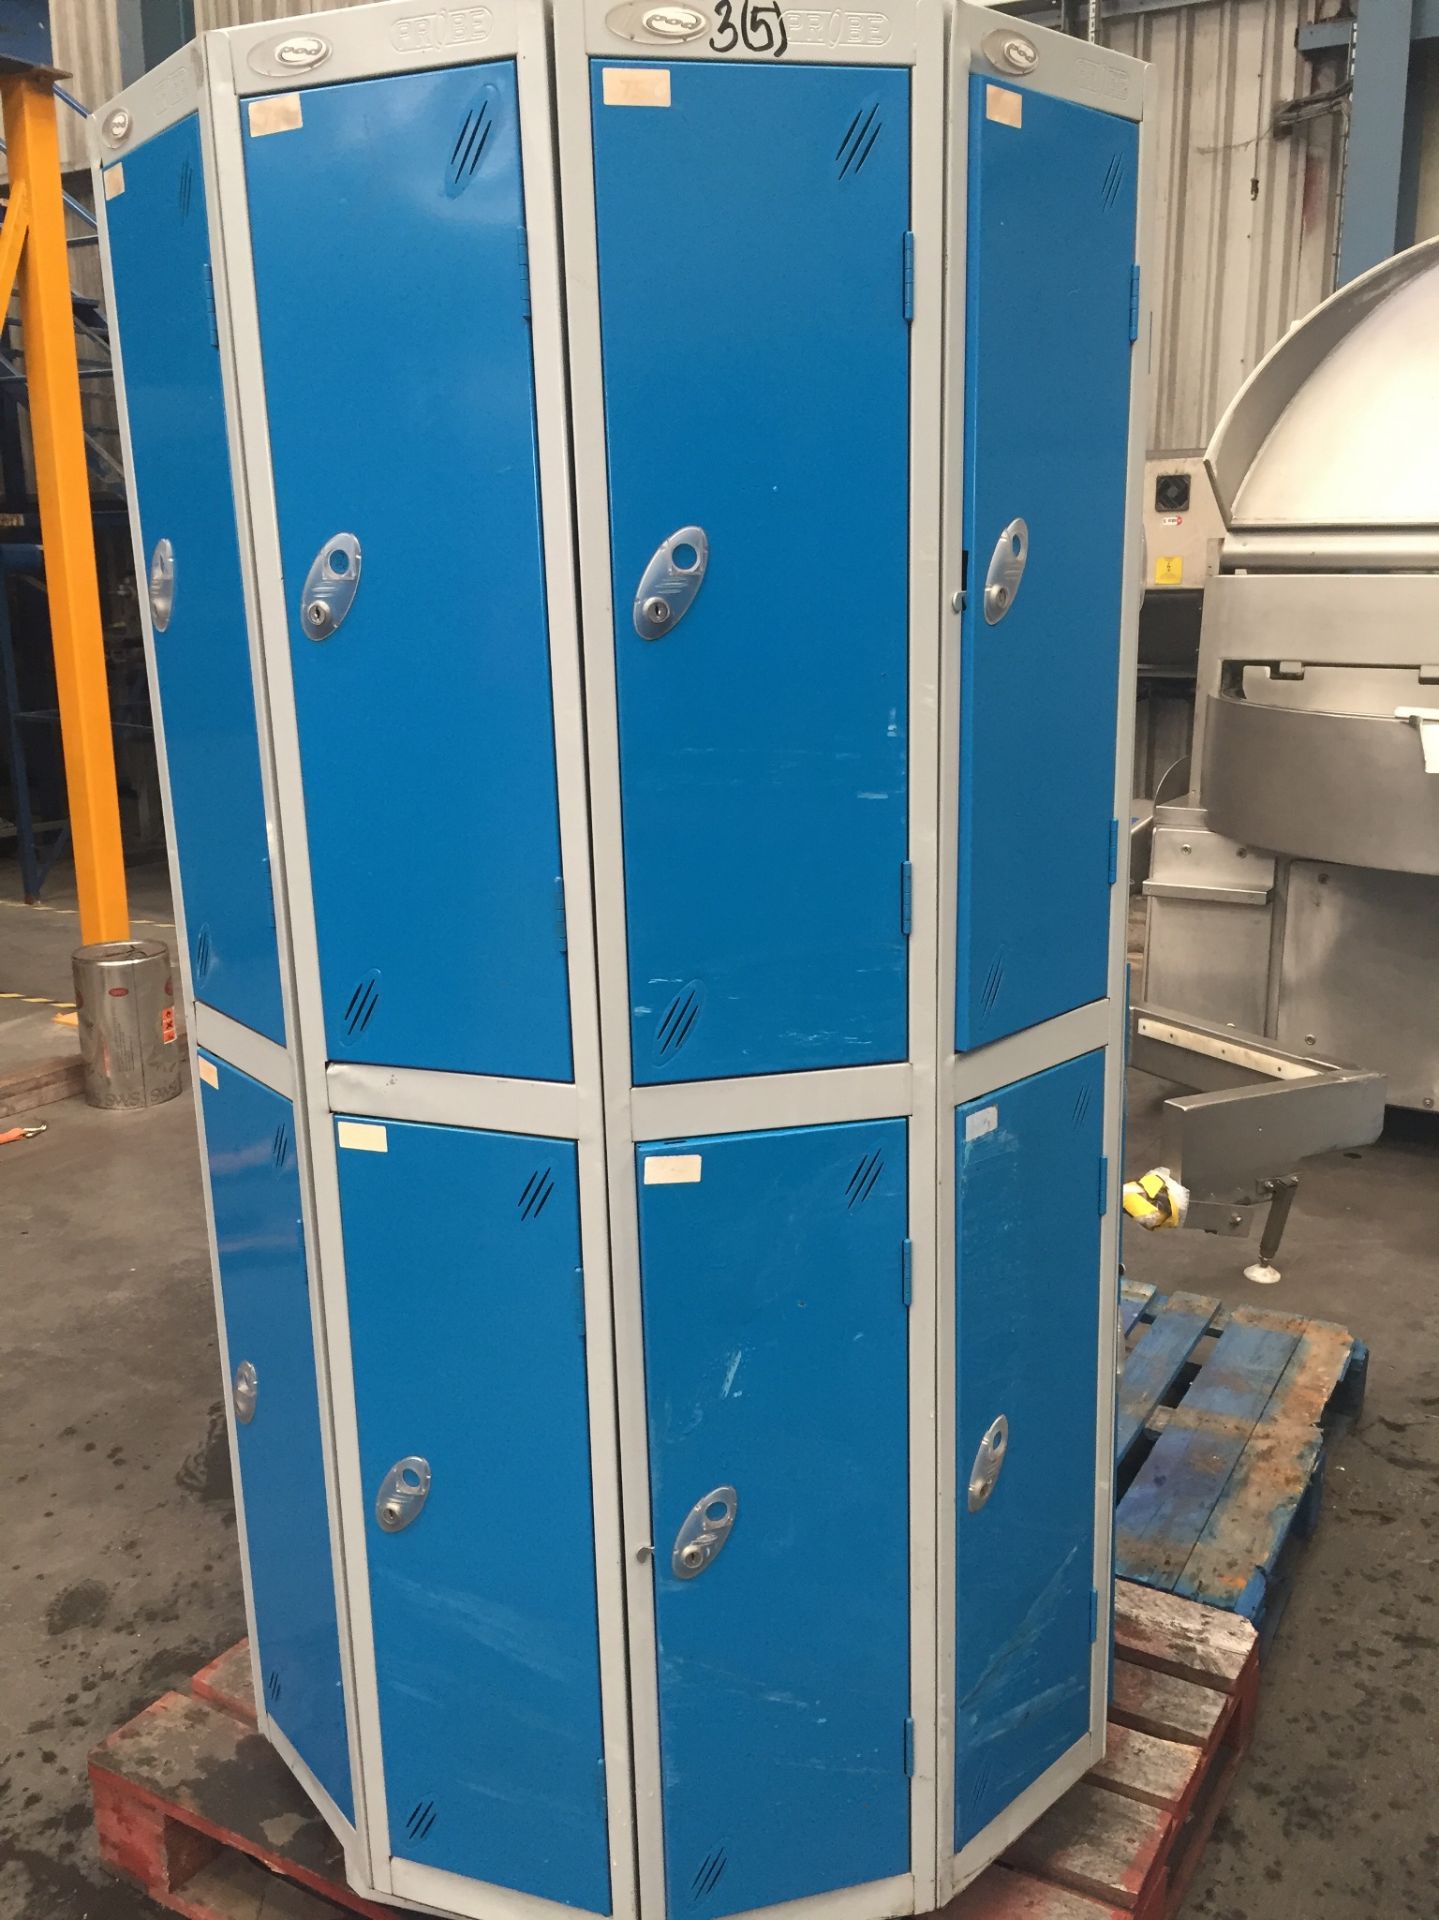 1 x rotary locker with 22 indivudual compartments, dimensions: 1900 H x 1100 x 1100 Lift out charge